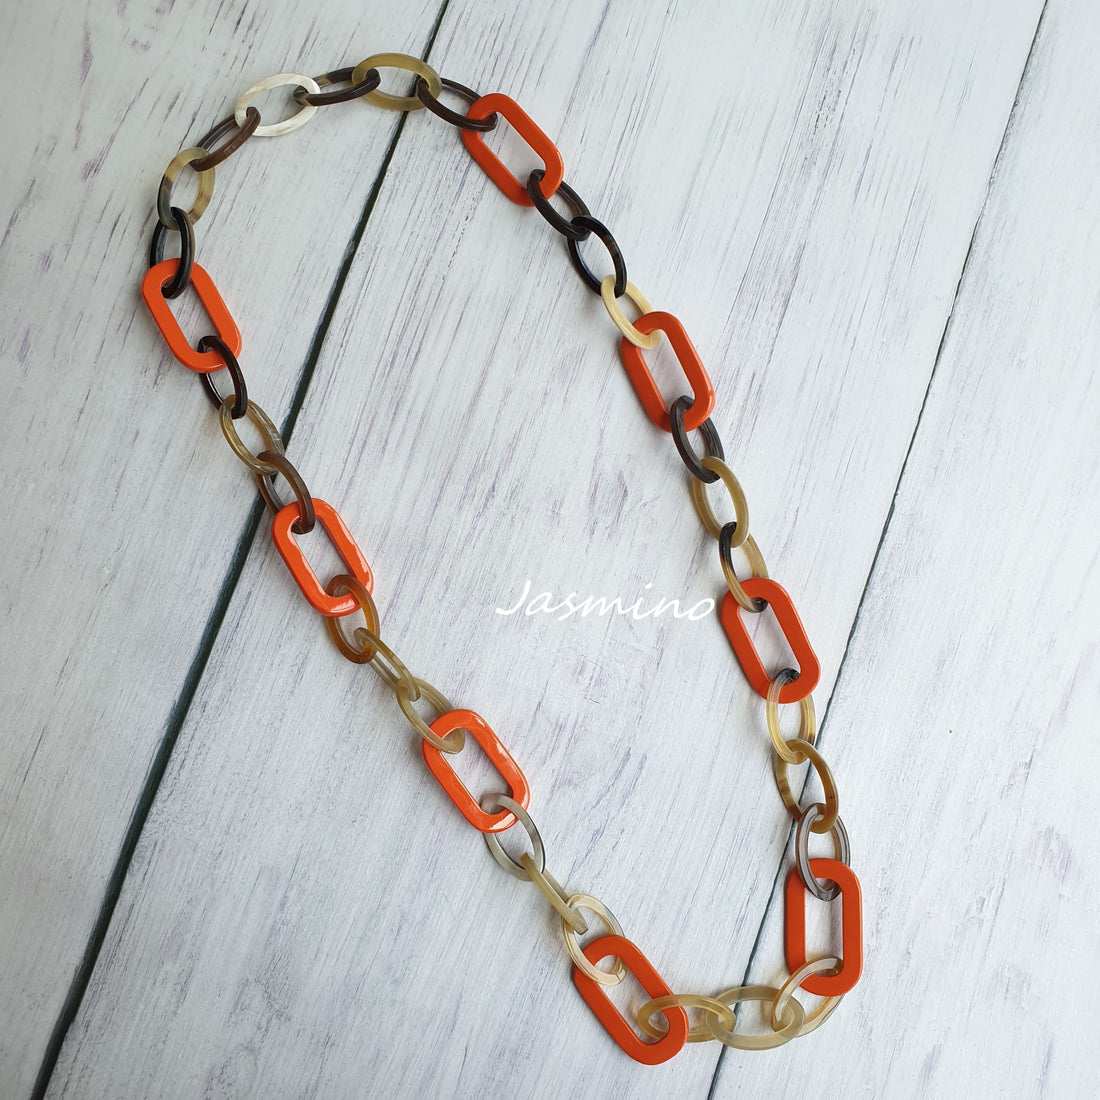 Jasmino unique handmade rectangle chain link necklace features brown and orange in natural buffalo horn for women for Thanksgiving's gifts